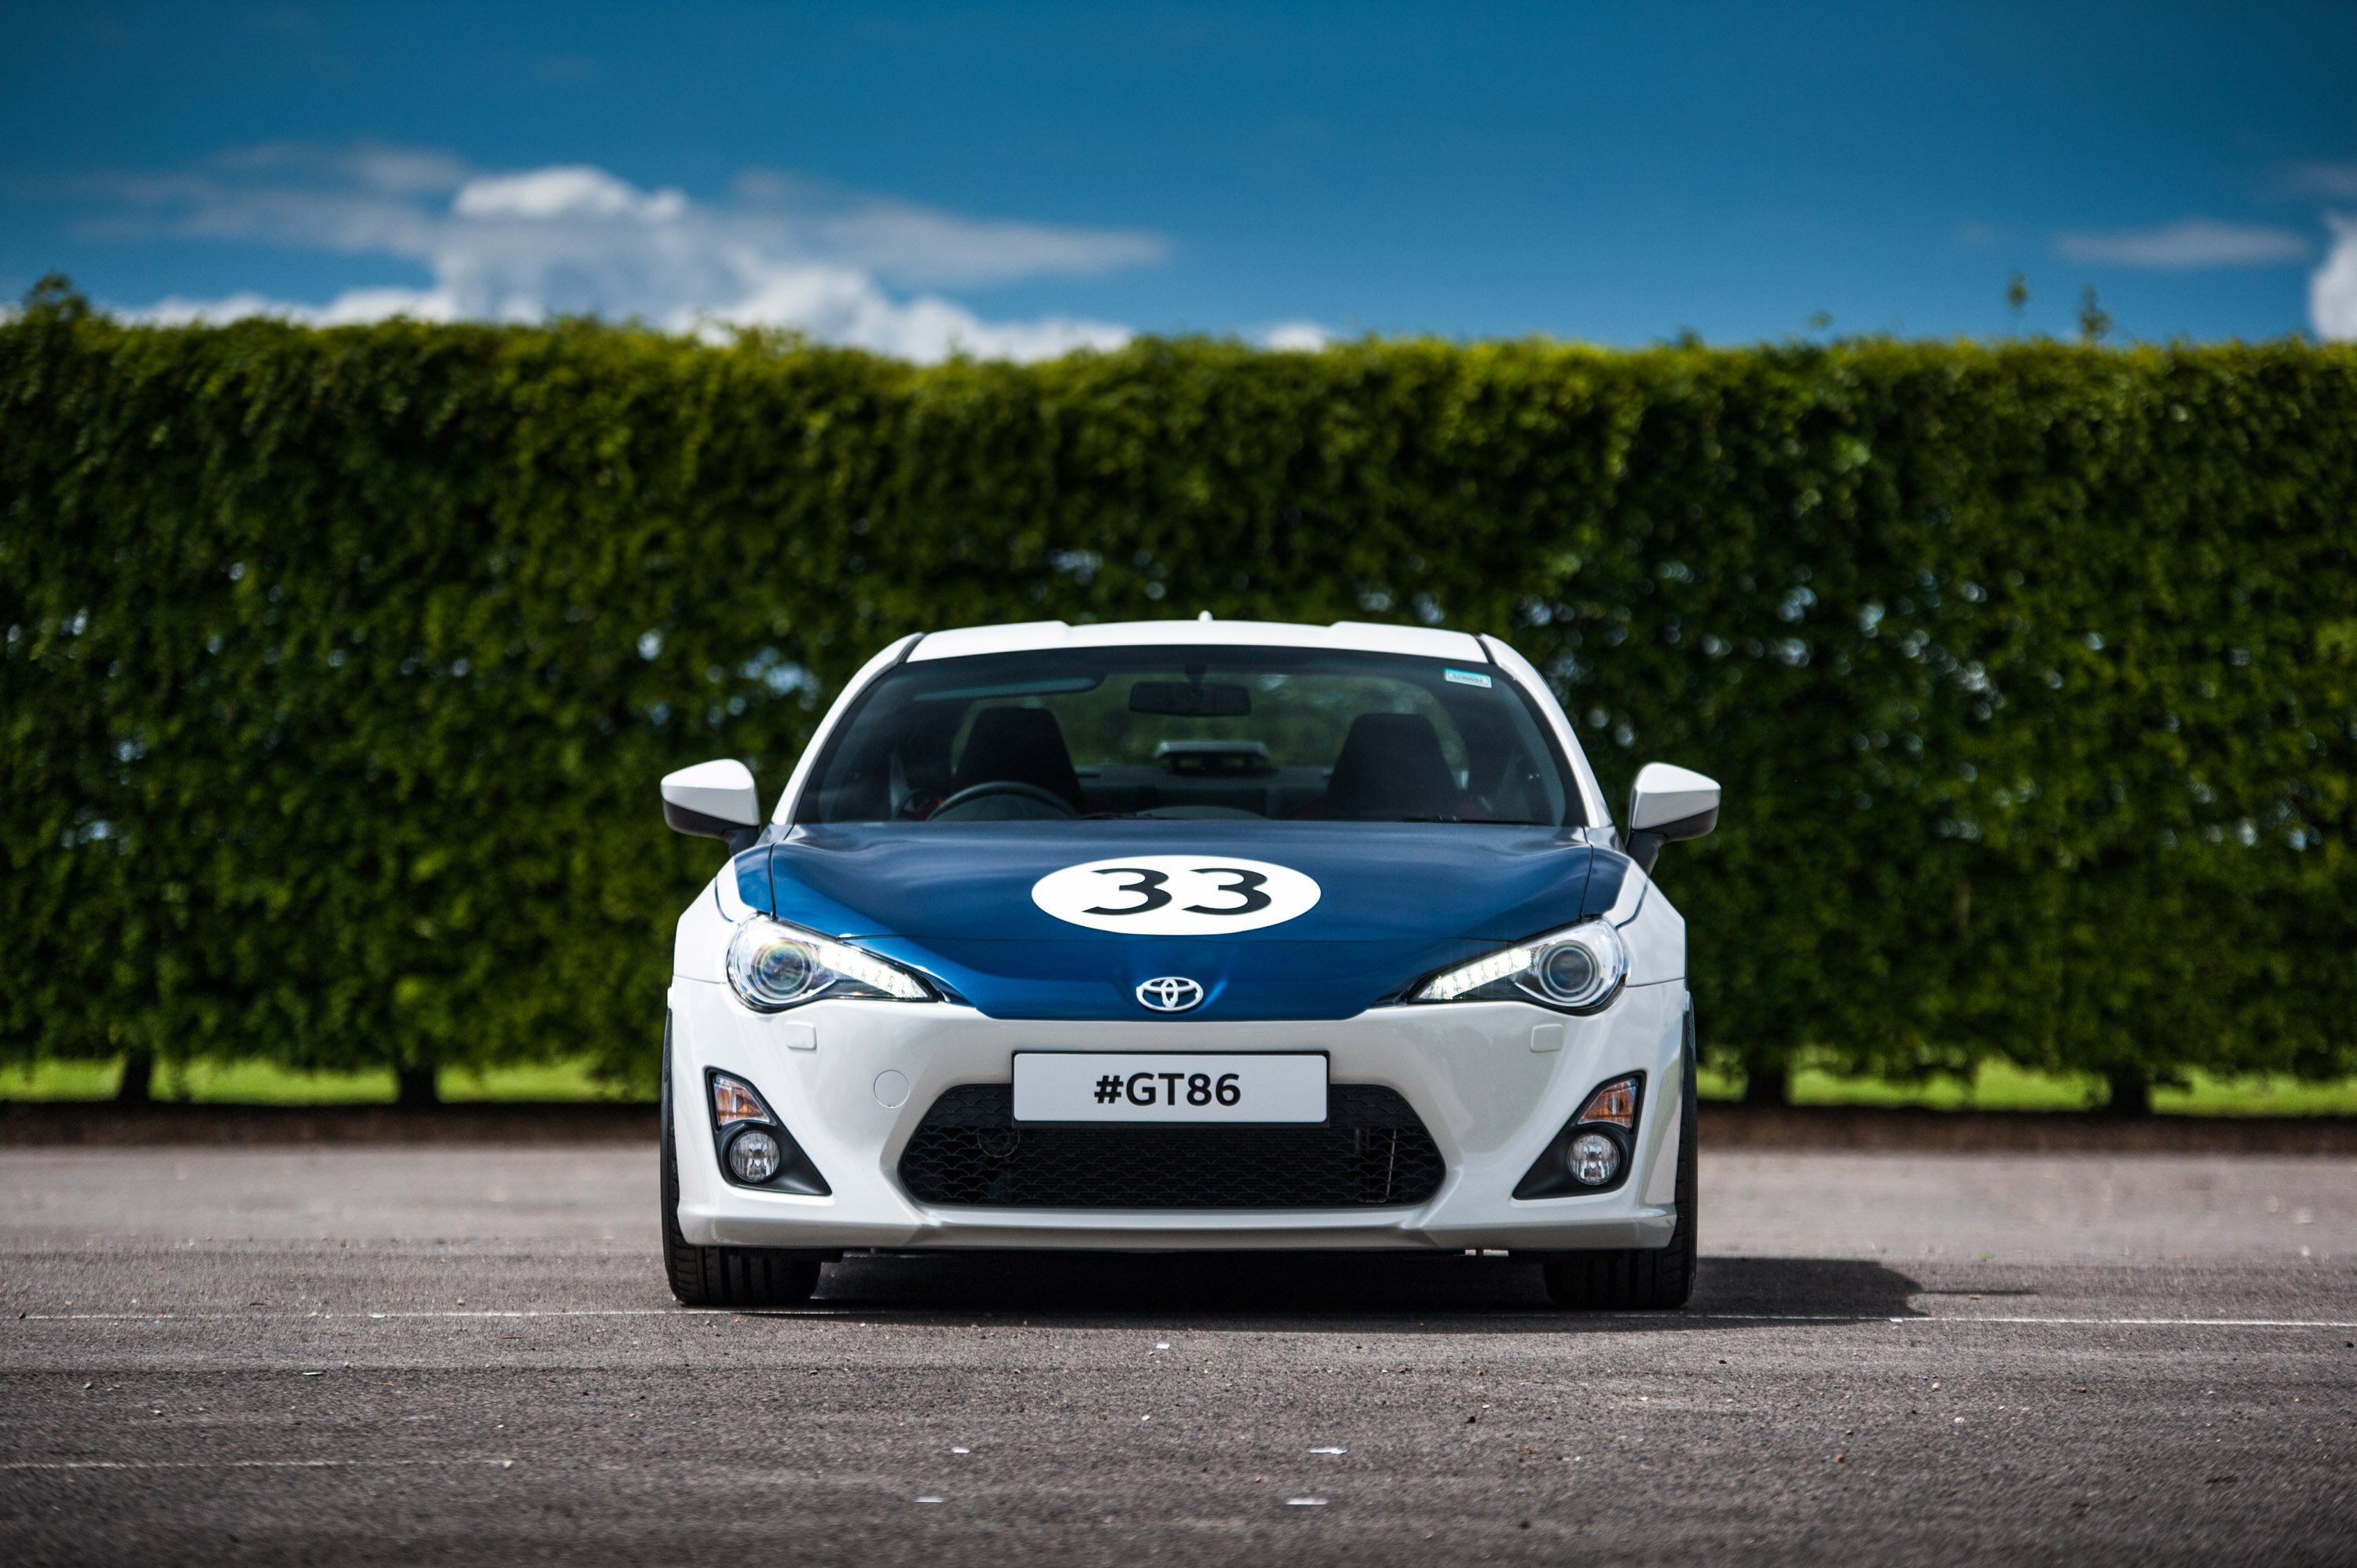 2015, Toyota, Gt86, Classic, Liveries, Coupe, Cars Wallpaper